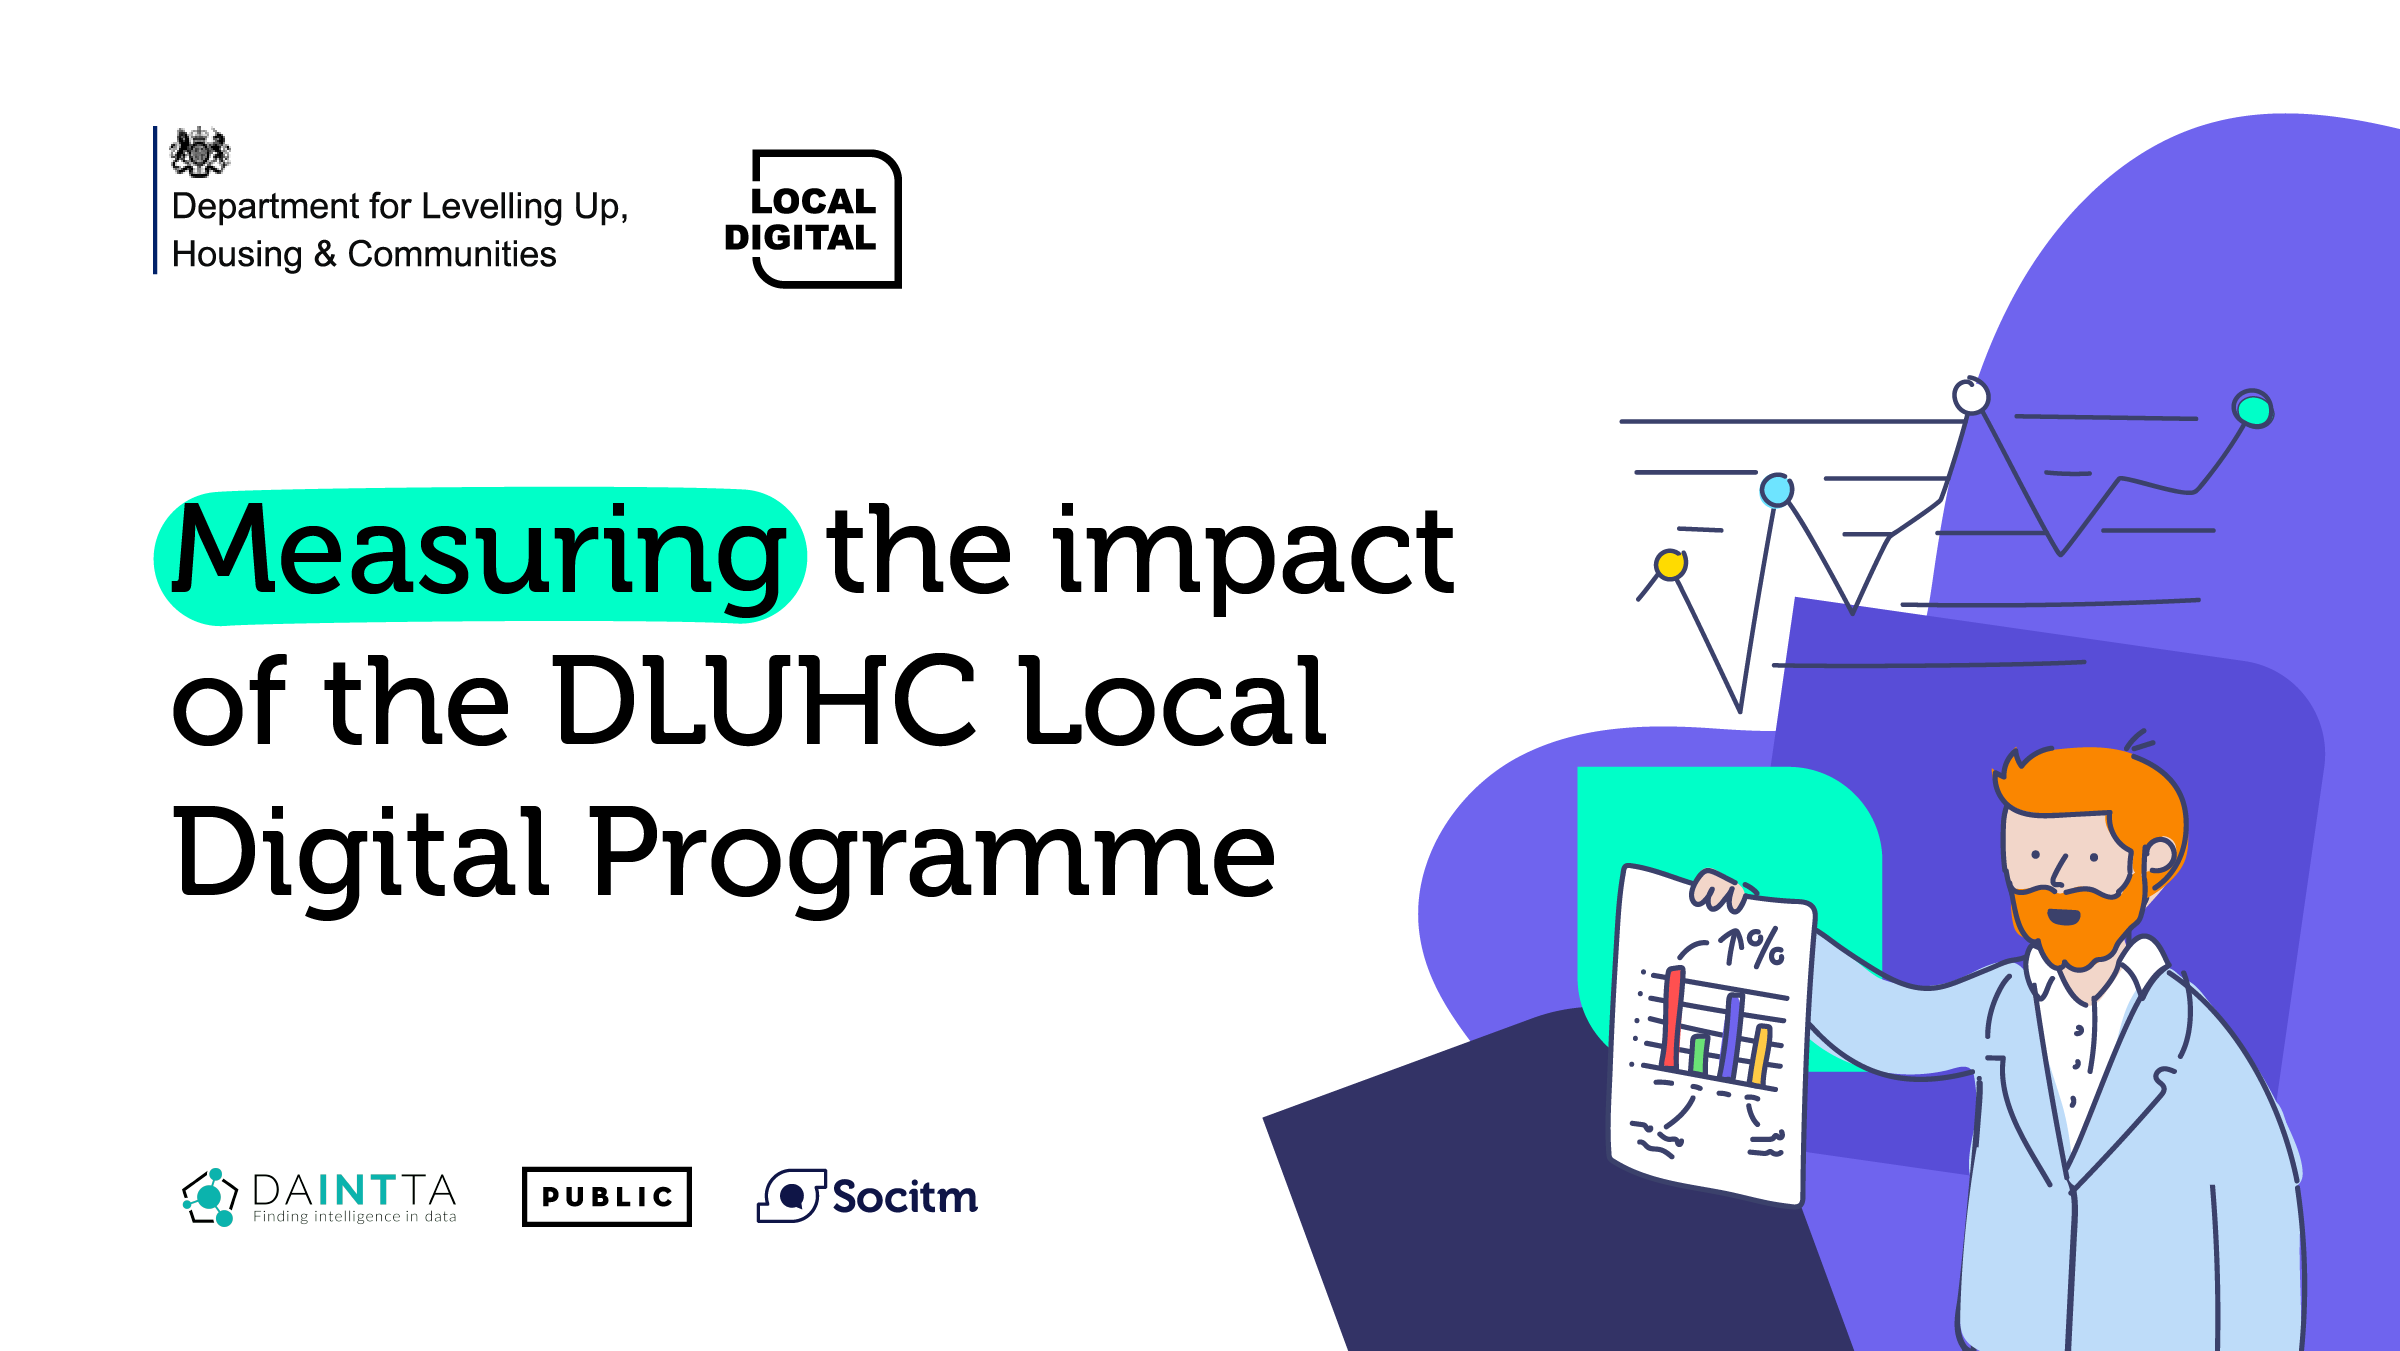 Measuring the impact of the DLUHC Local Digital programme with DAINTTA, Public and Socitm.